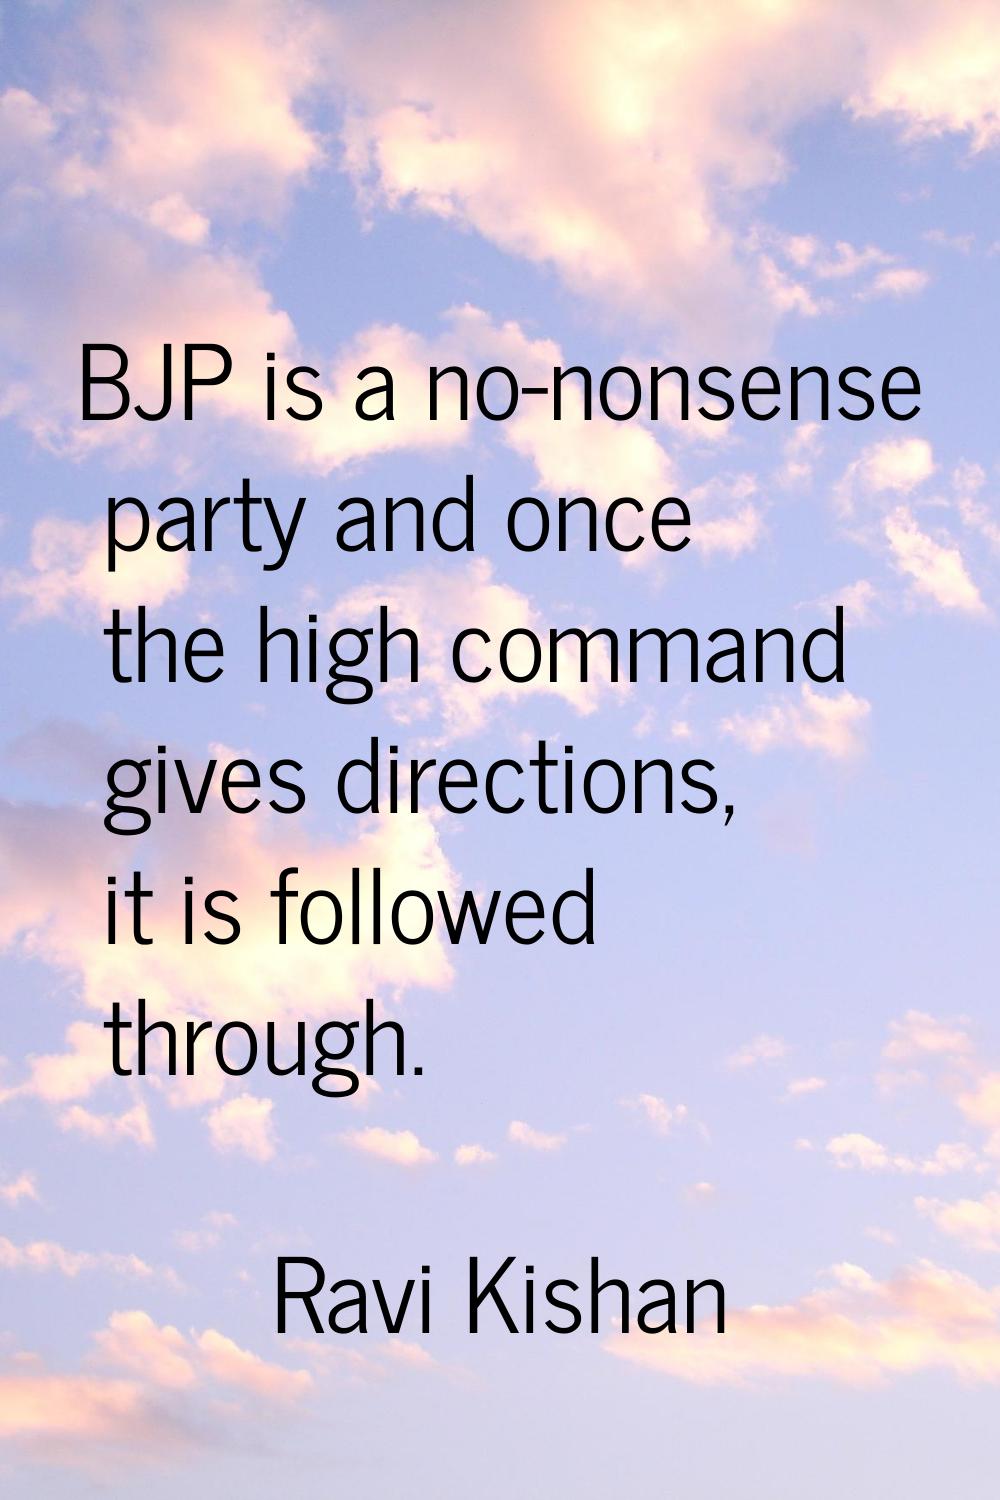 BJP is a no-nonsense party and once the high command gives directions, it is followed through.